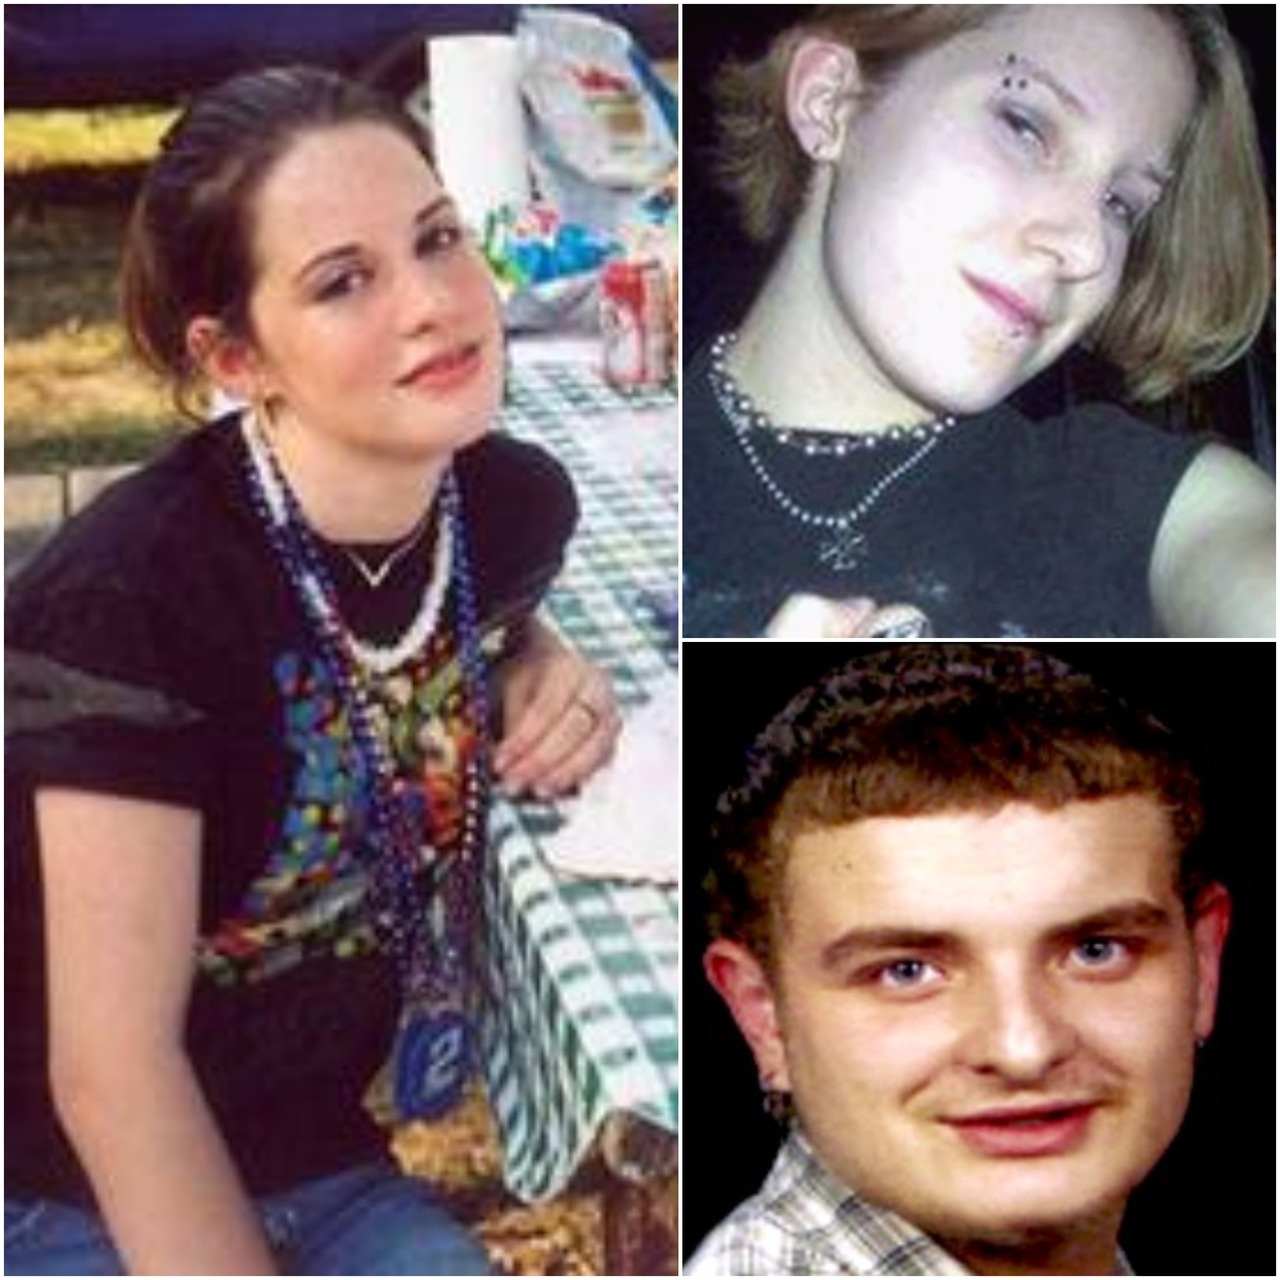 Pictured left: Adrianne Reynolds (16); pictured top right: Sarah Kolb (16); pictured bottom right: Cory Gregory (17). Images taken circa 2004
Sarah and Cory met in East Moline, Illinois in 2003. Both were enrolled in a GED program at the Outreach...